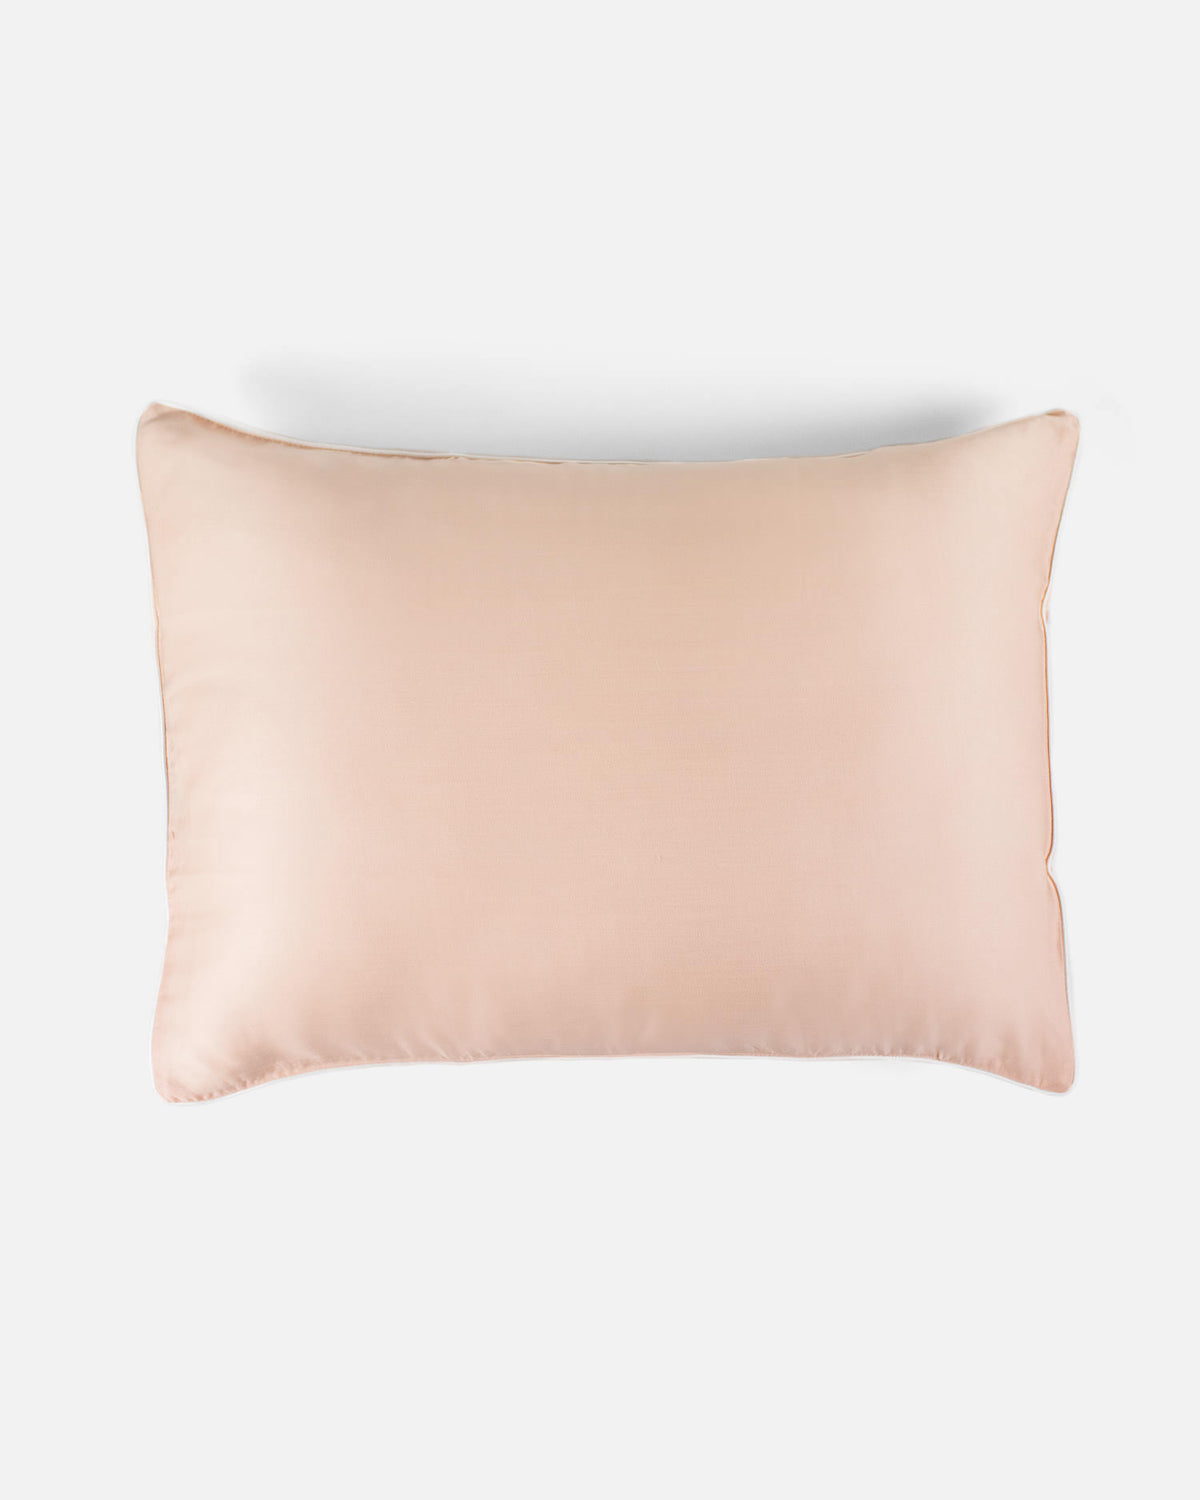 ava and ava organic bamboo lyocell toddler pillowcases / mini pillowcases / tempur pillowcase. hypoallergenic soft and breathable. color pink with white piping